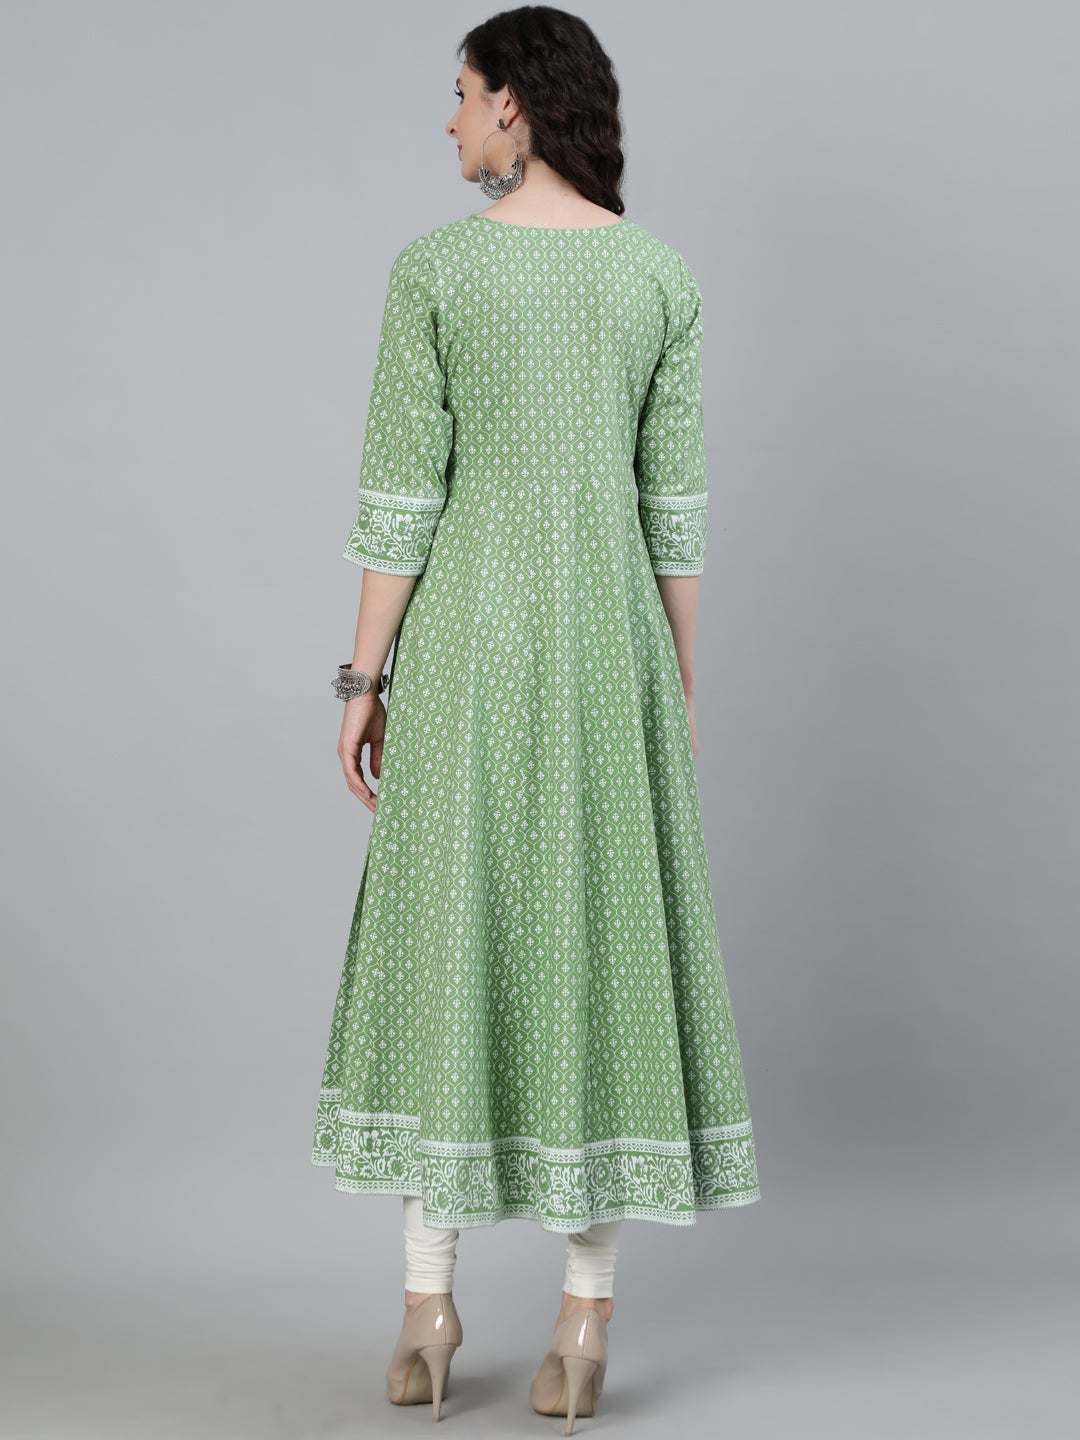 Green Printed Anarkali with Embroidered Yoke